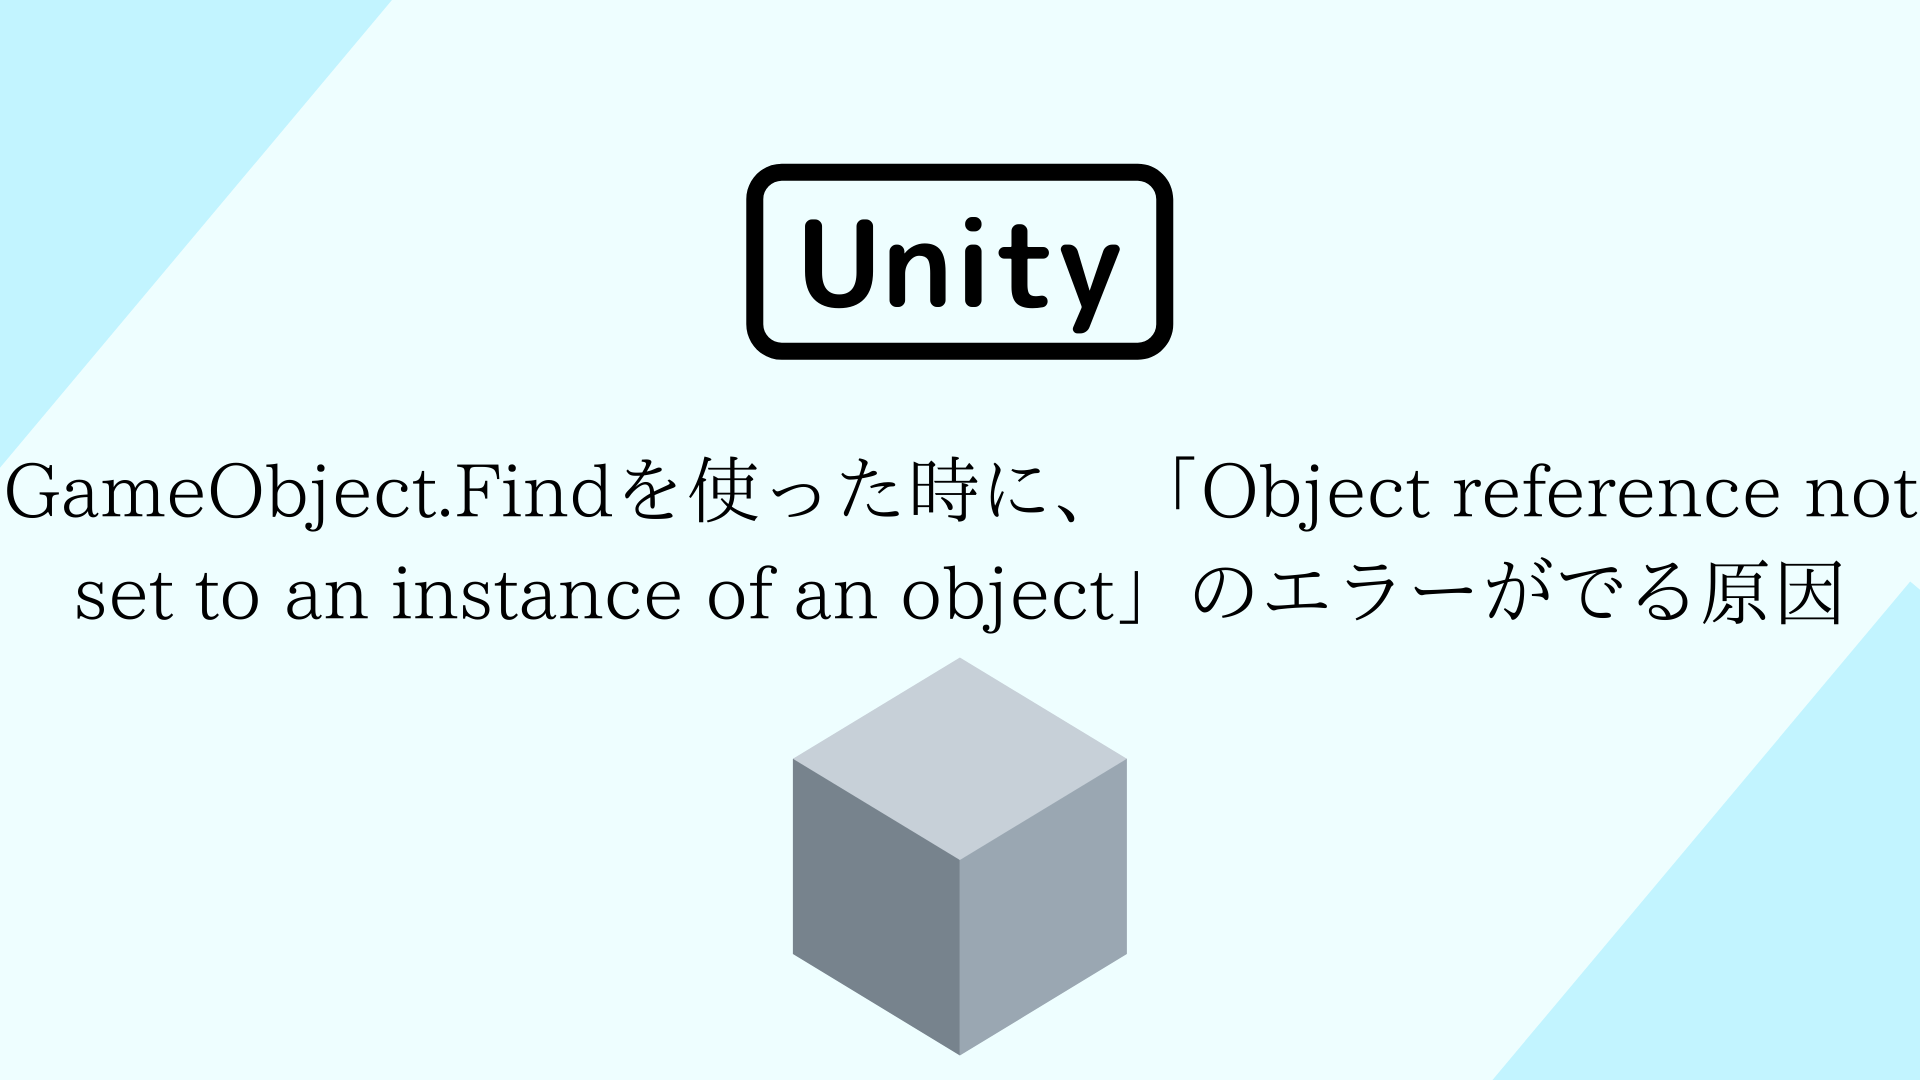 GameObject.Findを使った時に、「Object reference not set to an instance of an object」のエラーがでる原因